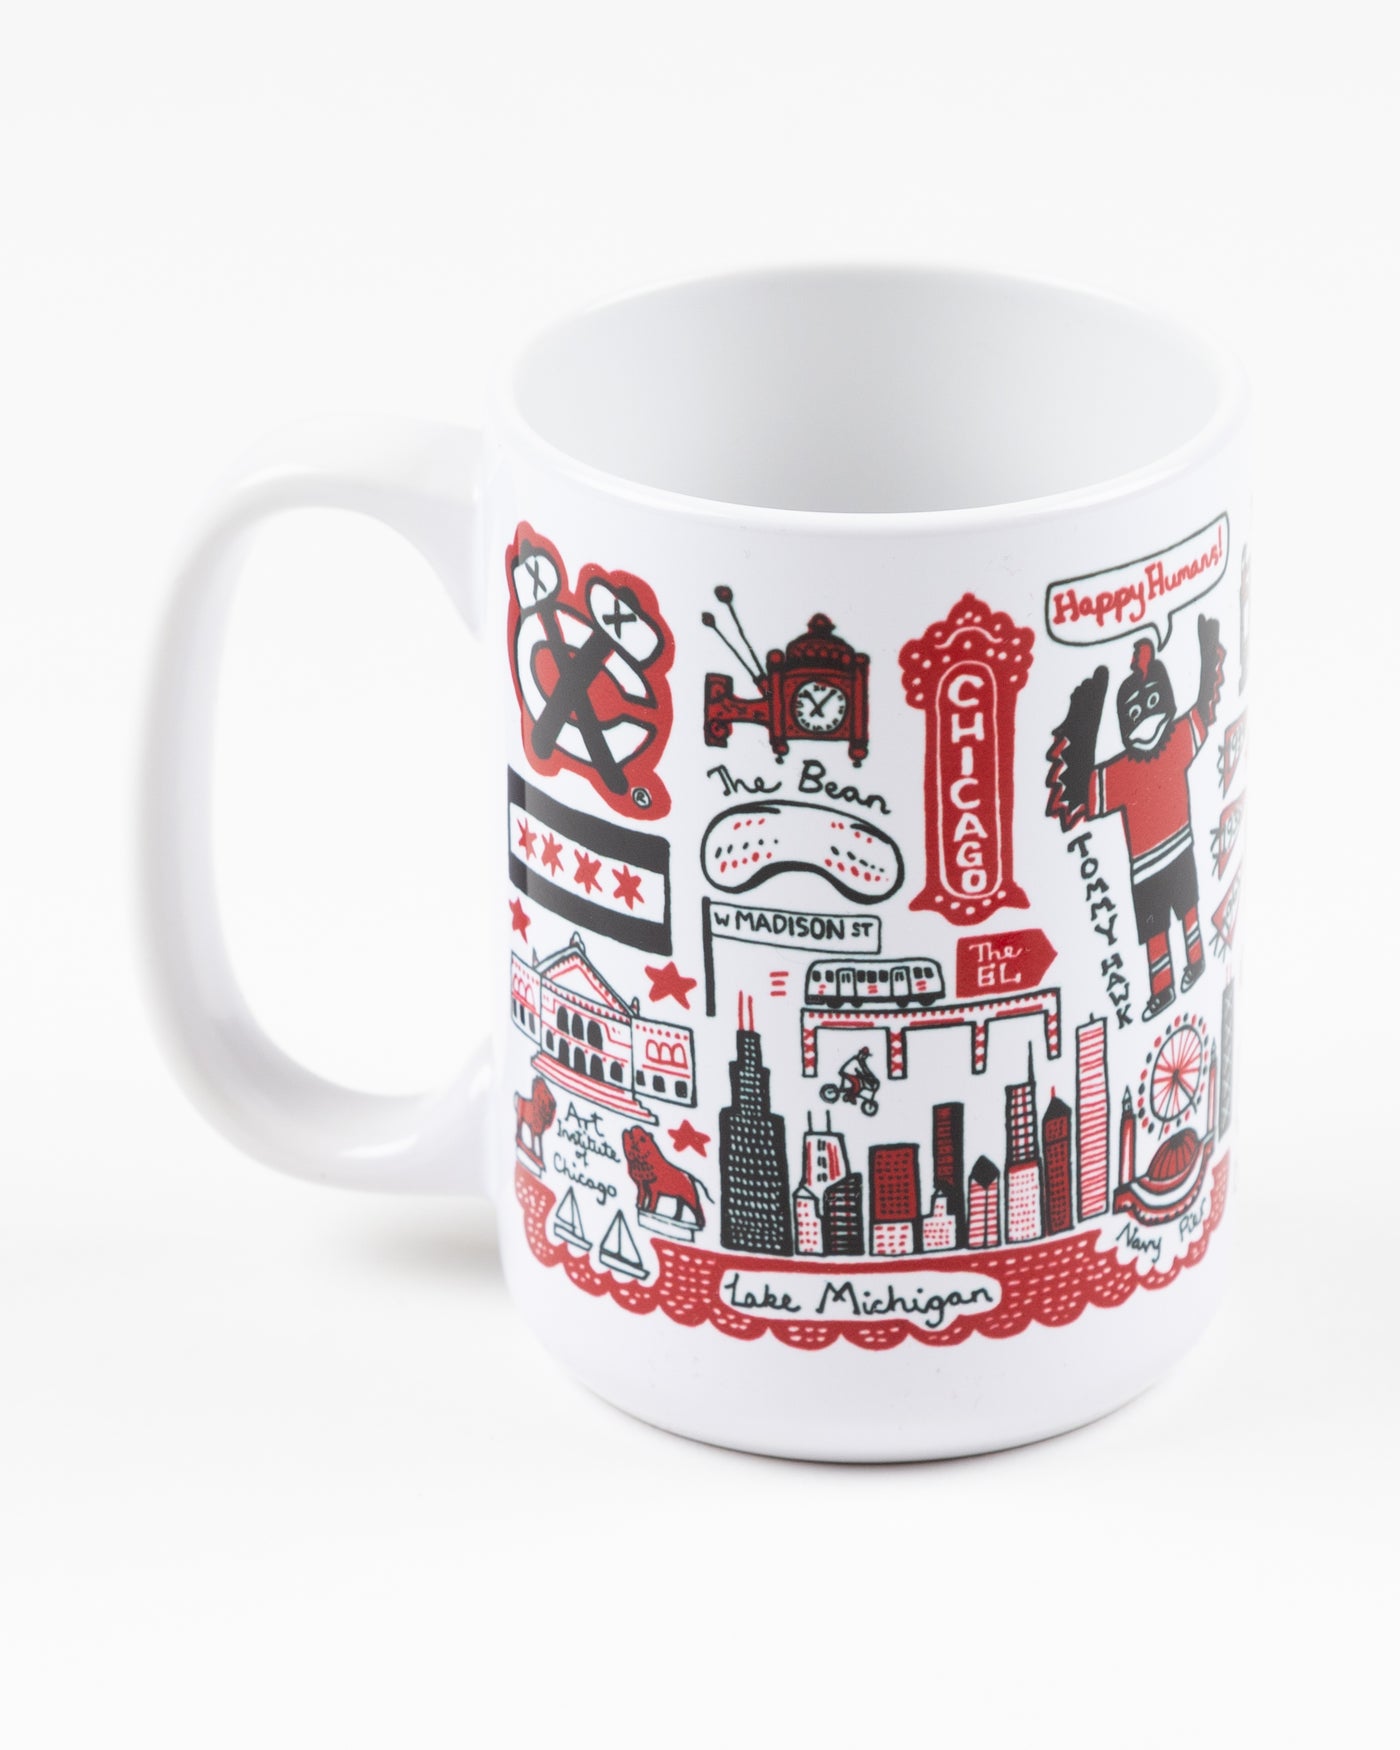 Julia Gash mug with all over Chicago and Chicago Blackhawks inspired graphic - back lay flat